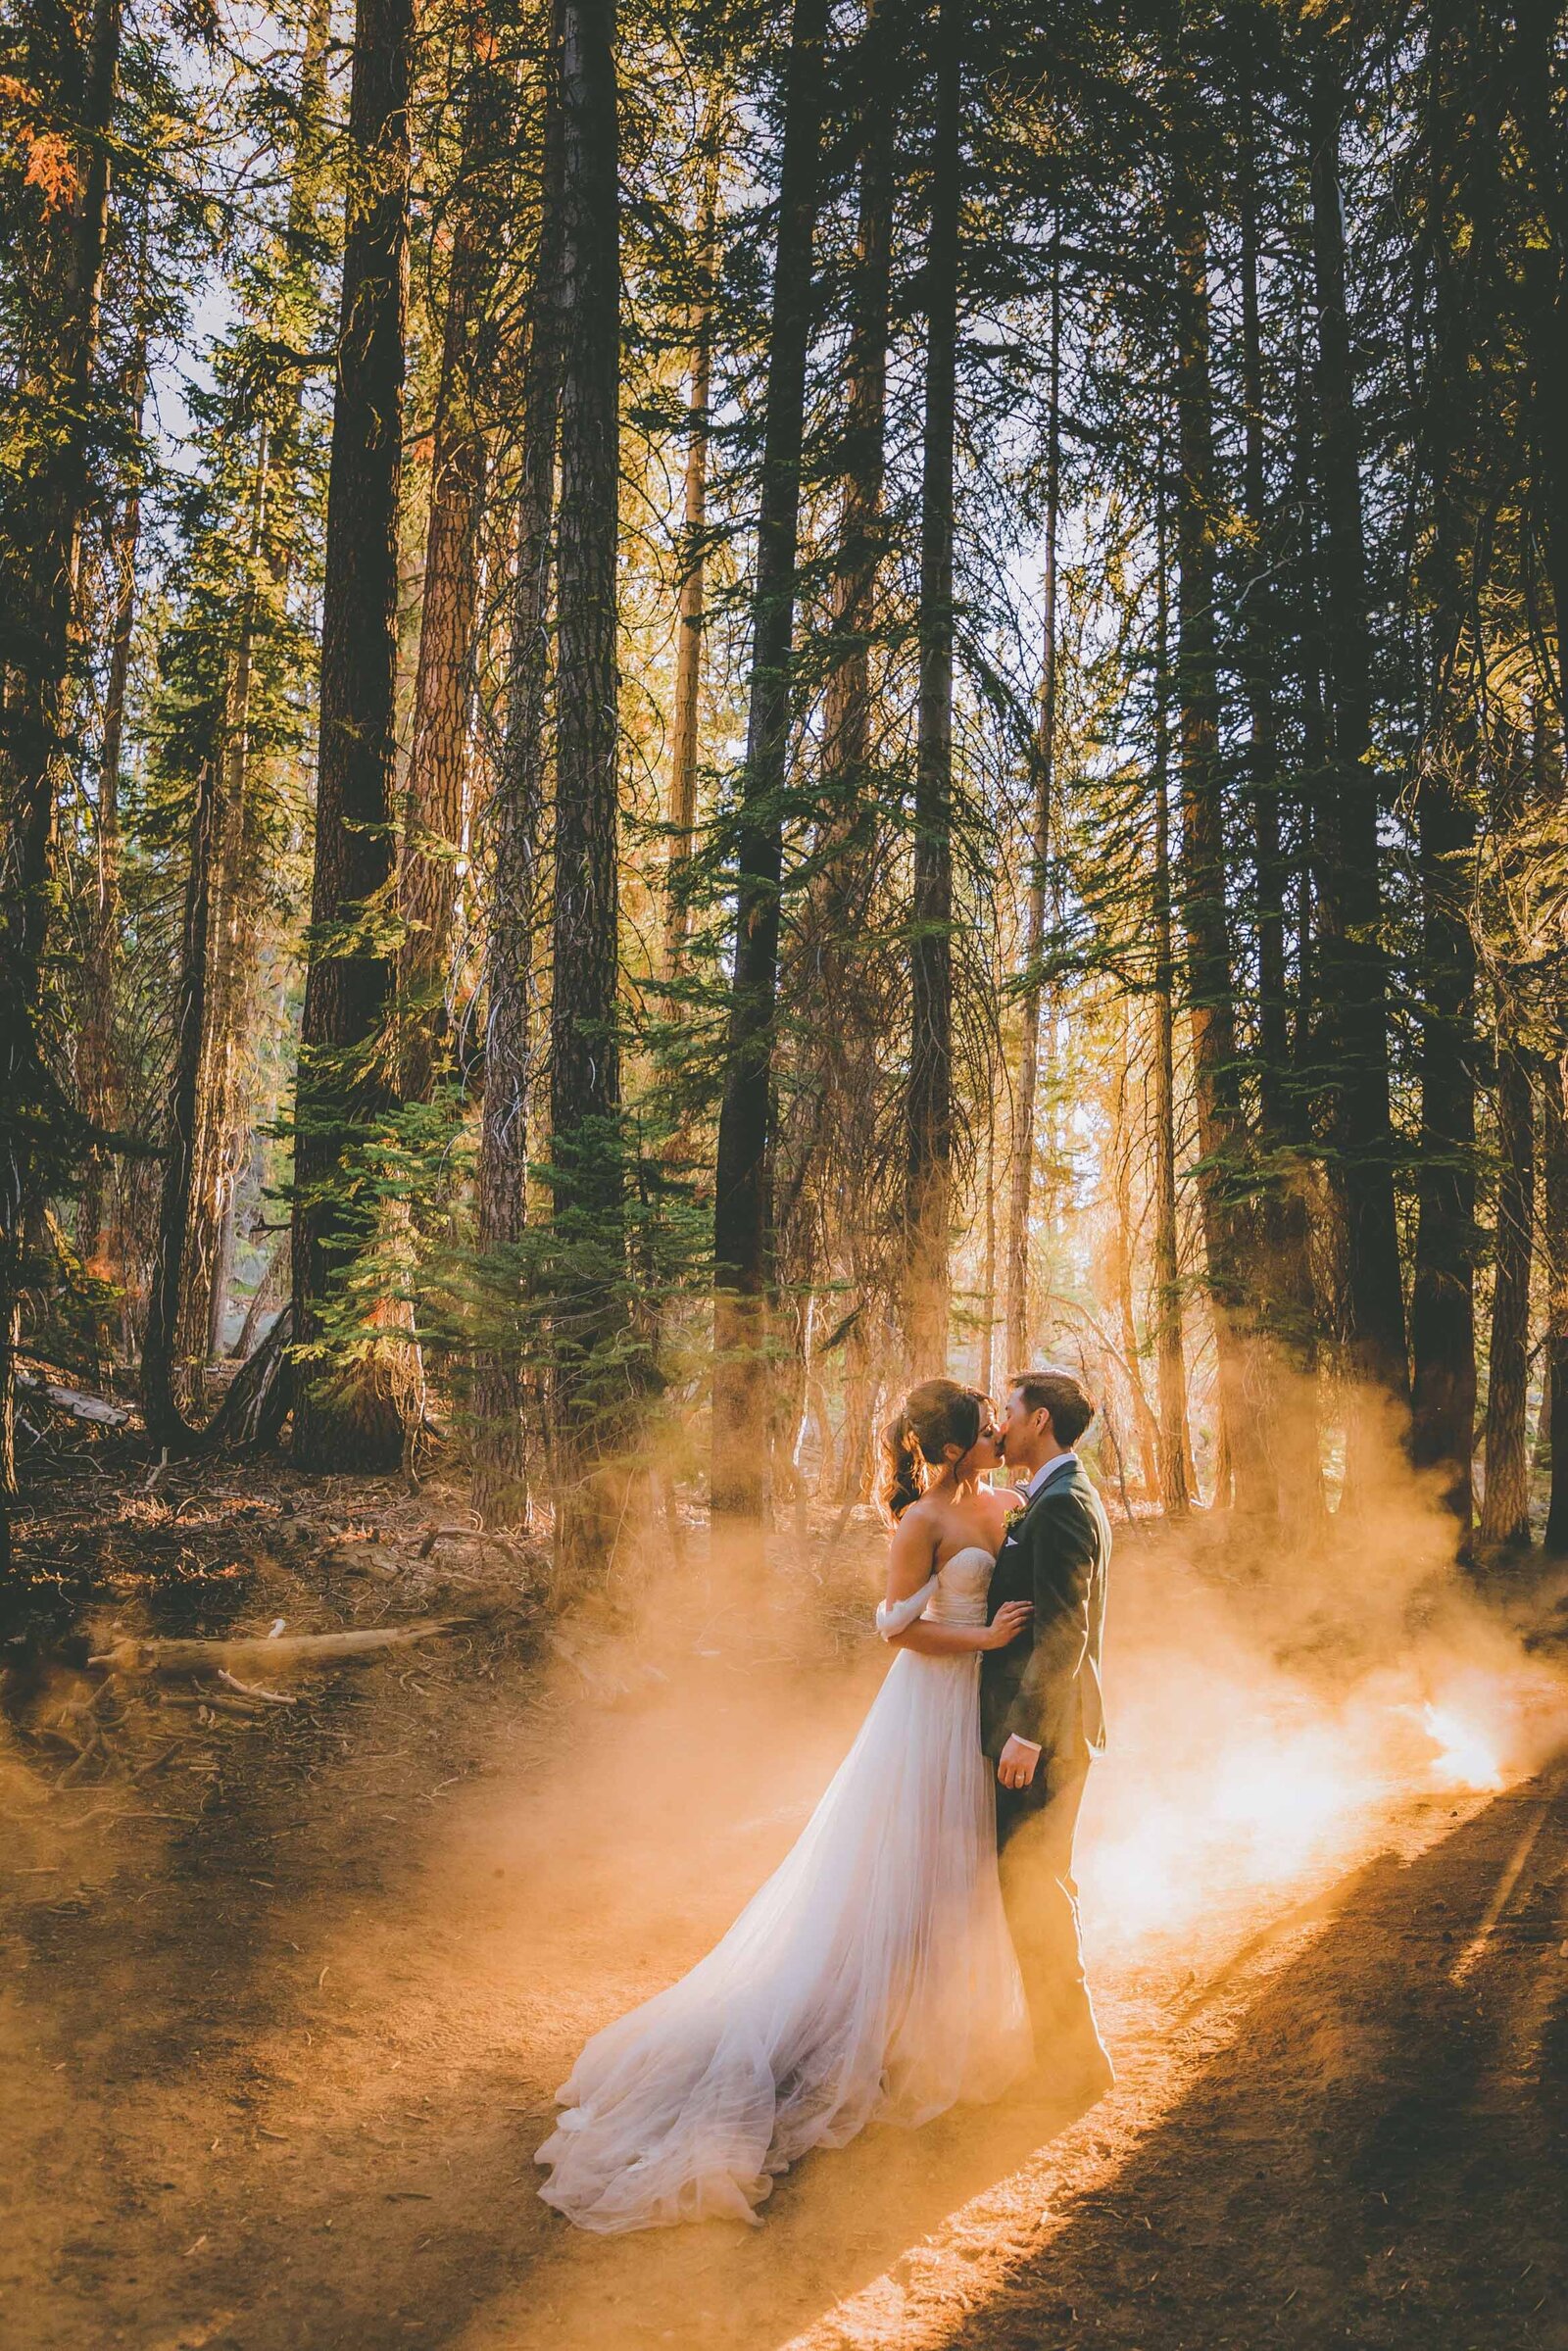 A couple kisses surrounded by sunrays in a Yosemite National Park forest.